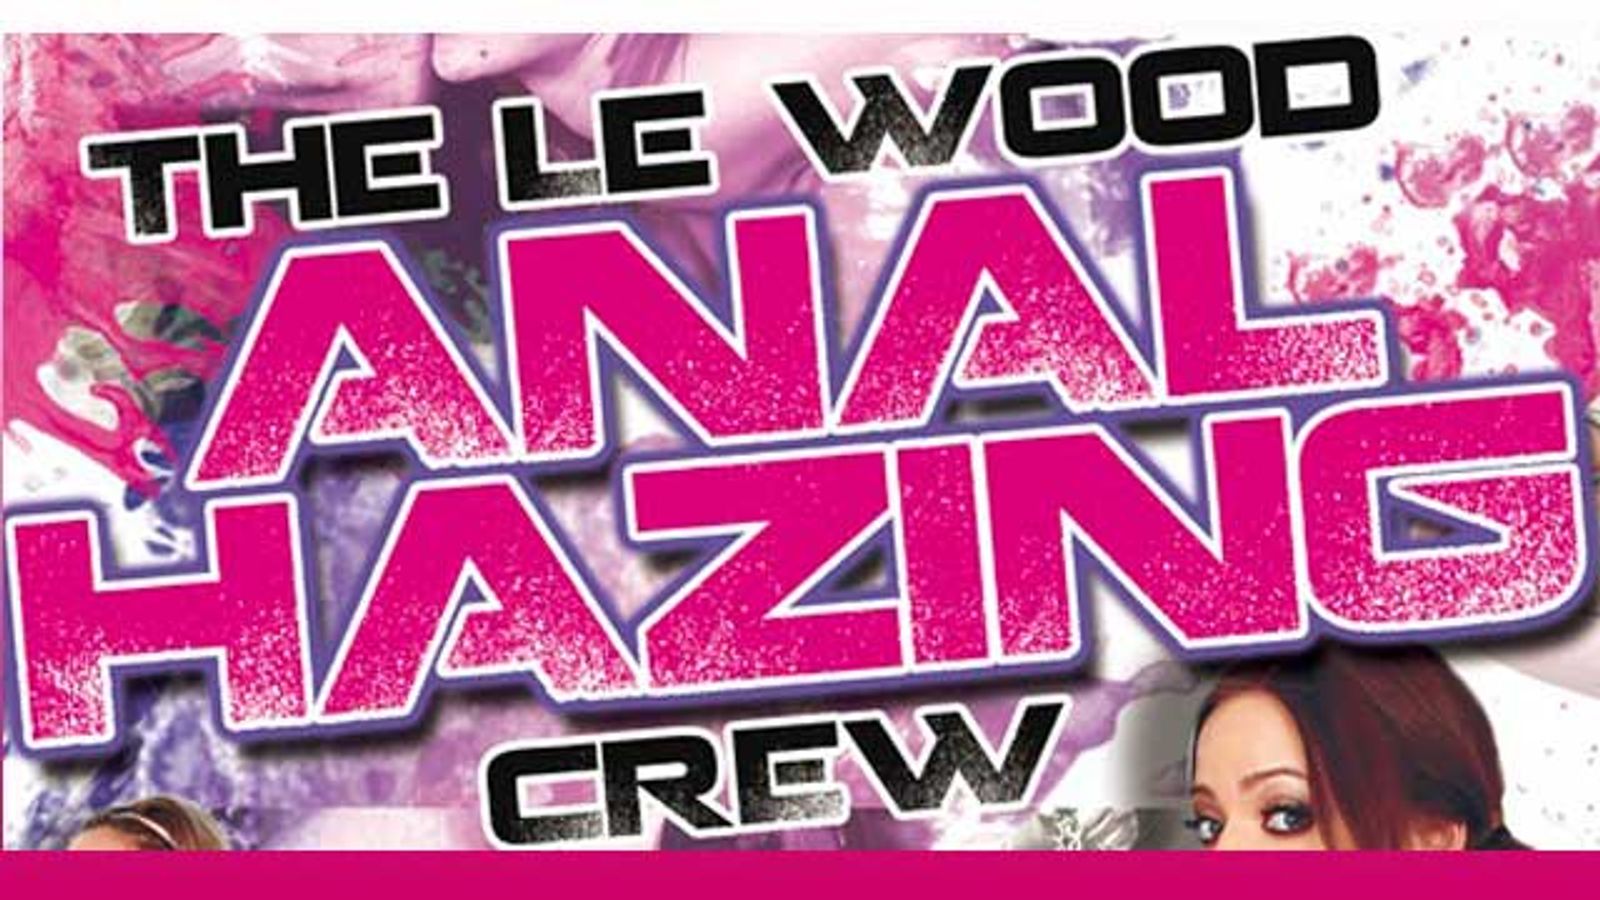 'The Le Wood Anal Hazing Crew' Receives Rave Response